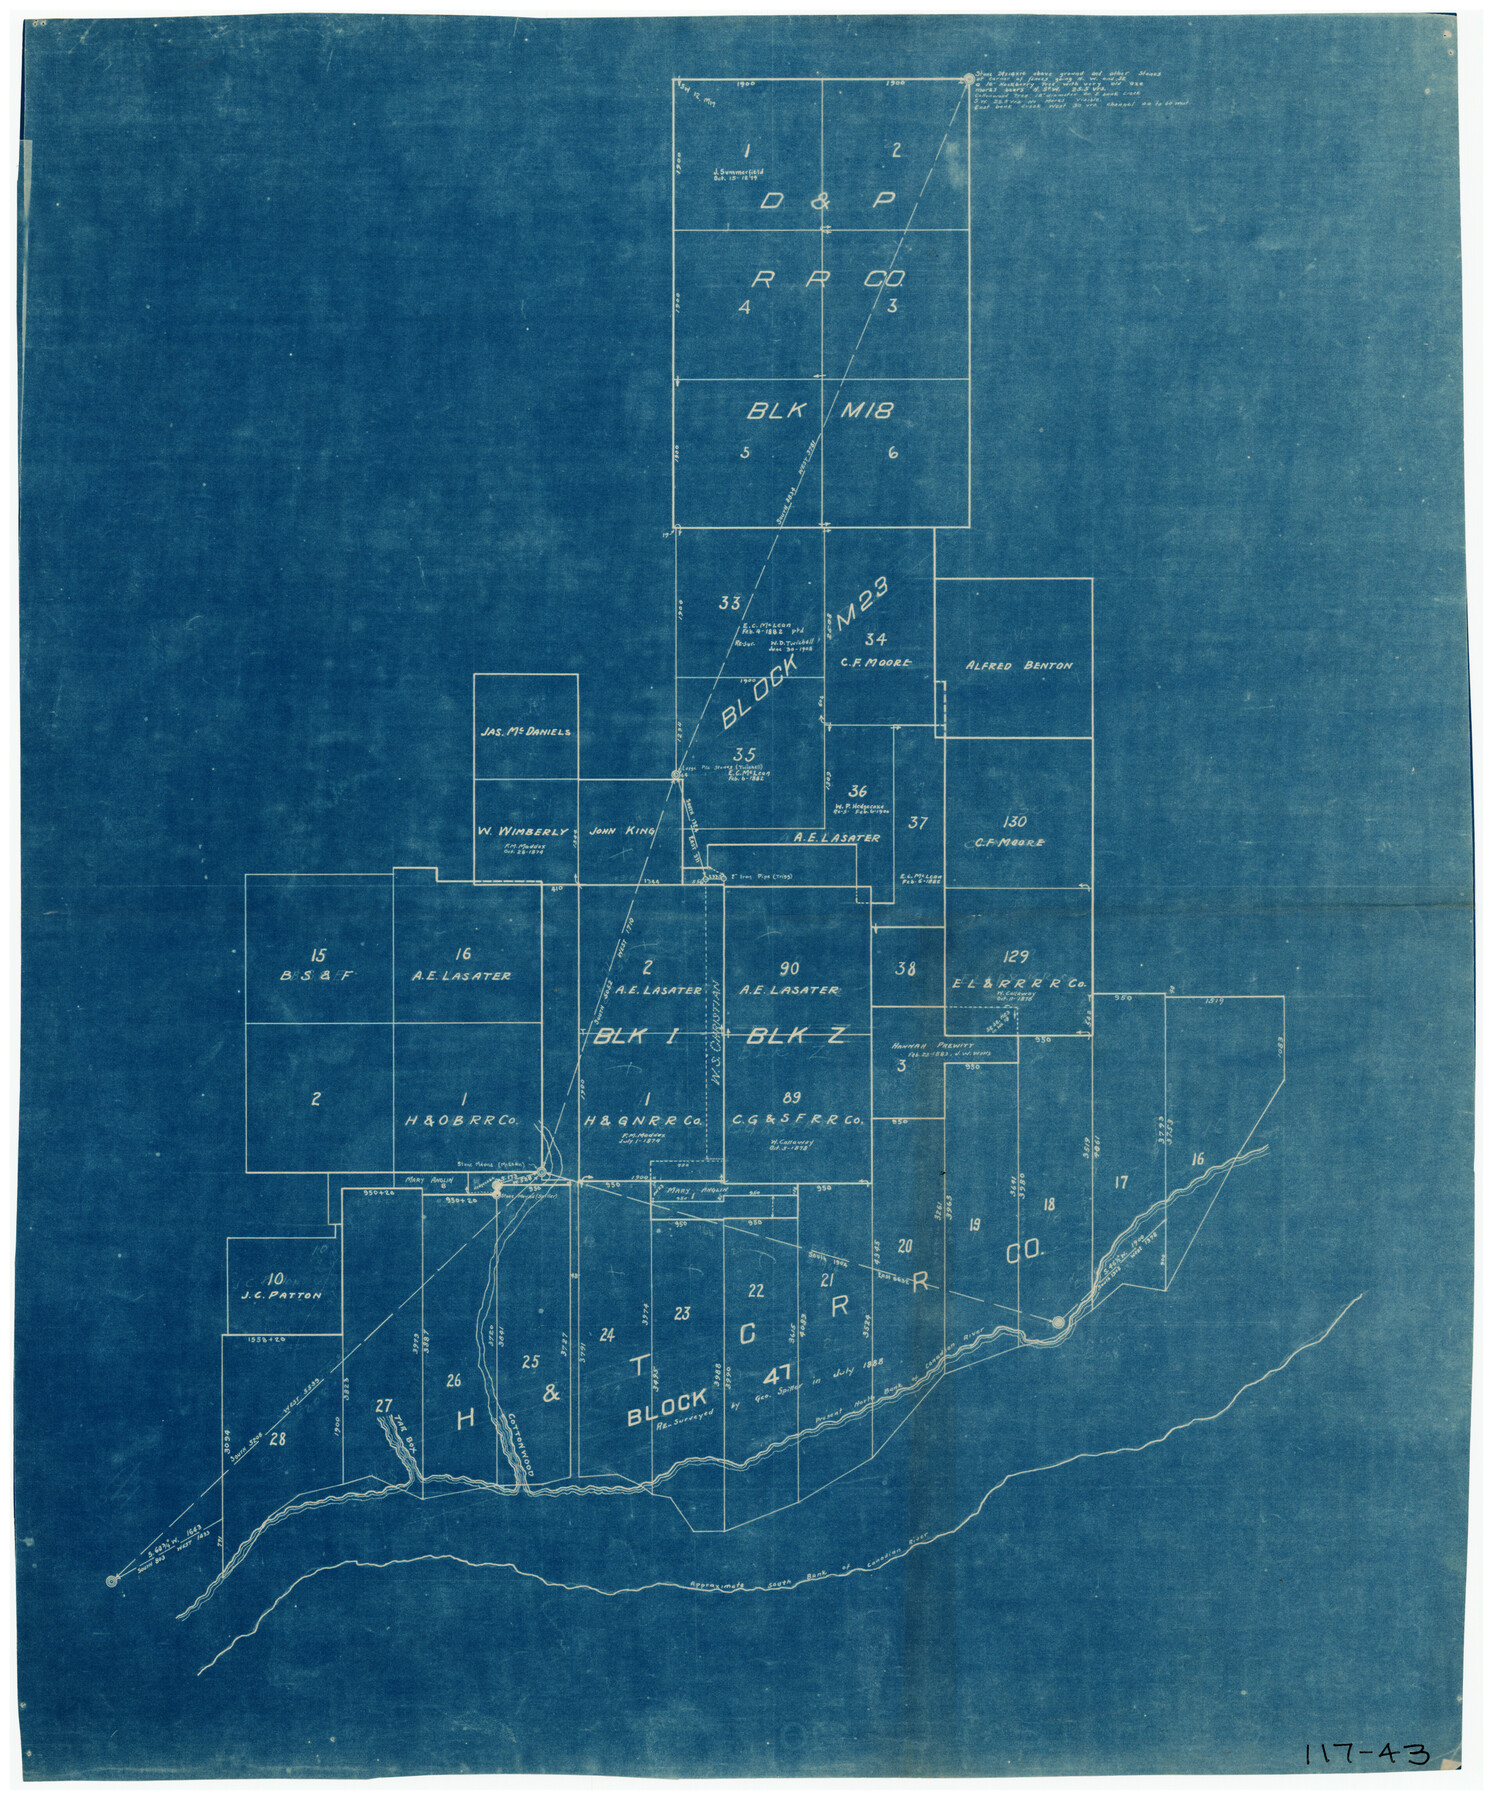 91157, [H. & T. C. RR. Company, Block 47 and vicinity], Twichell Survey Records